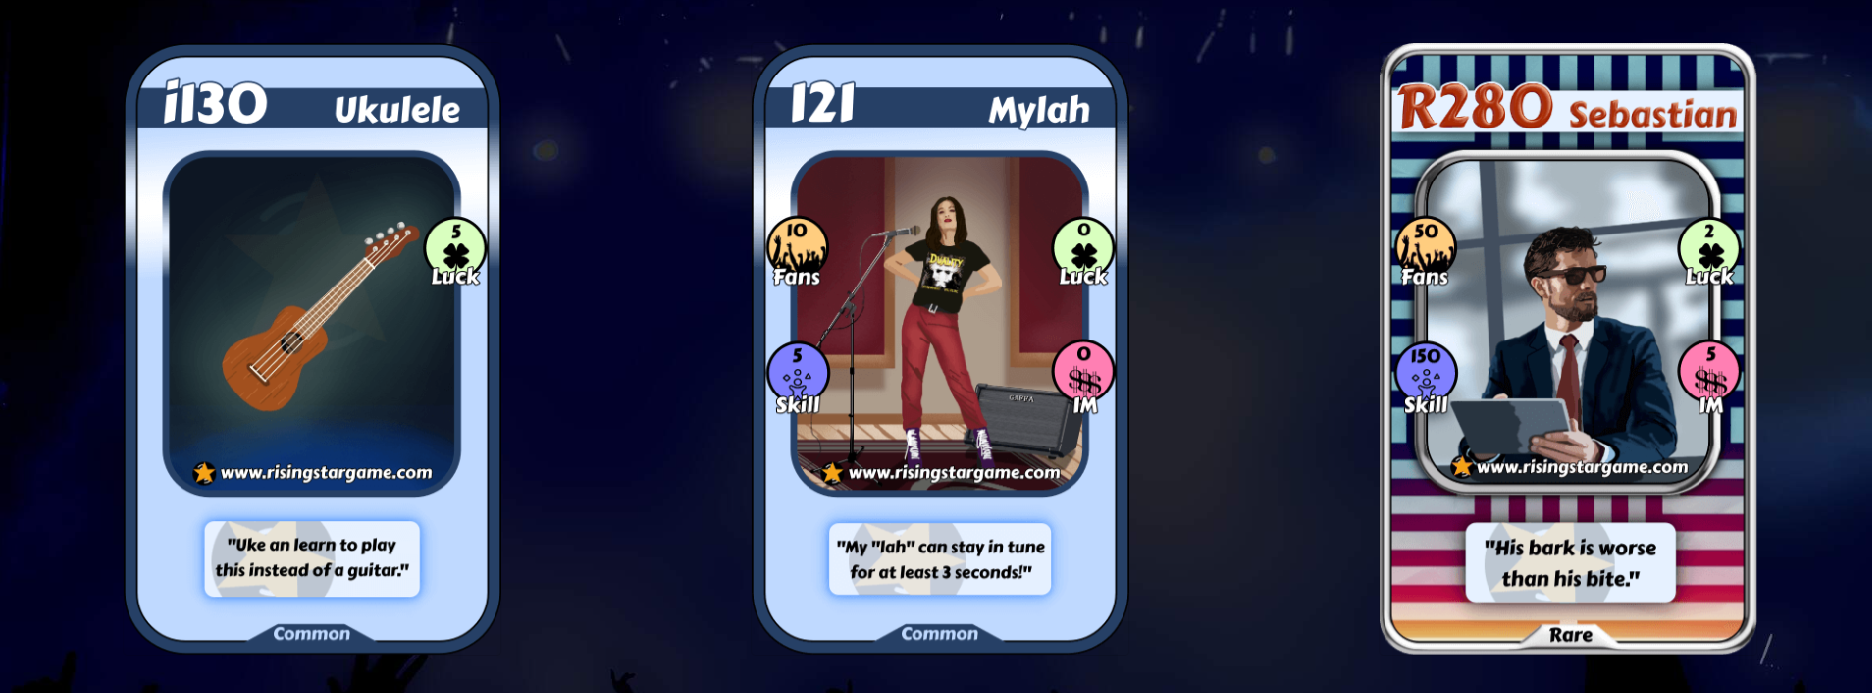 mypack11022023.png